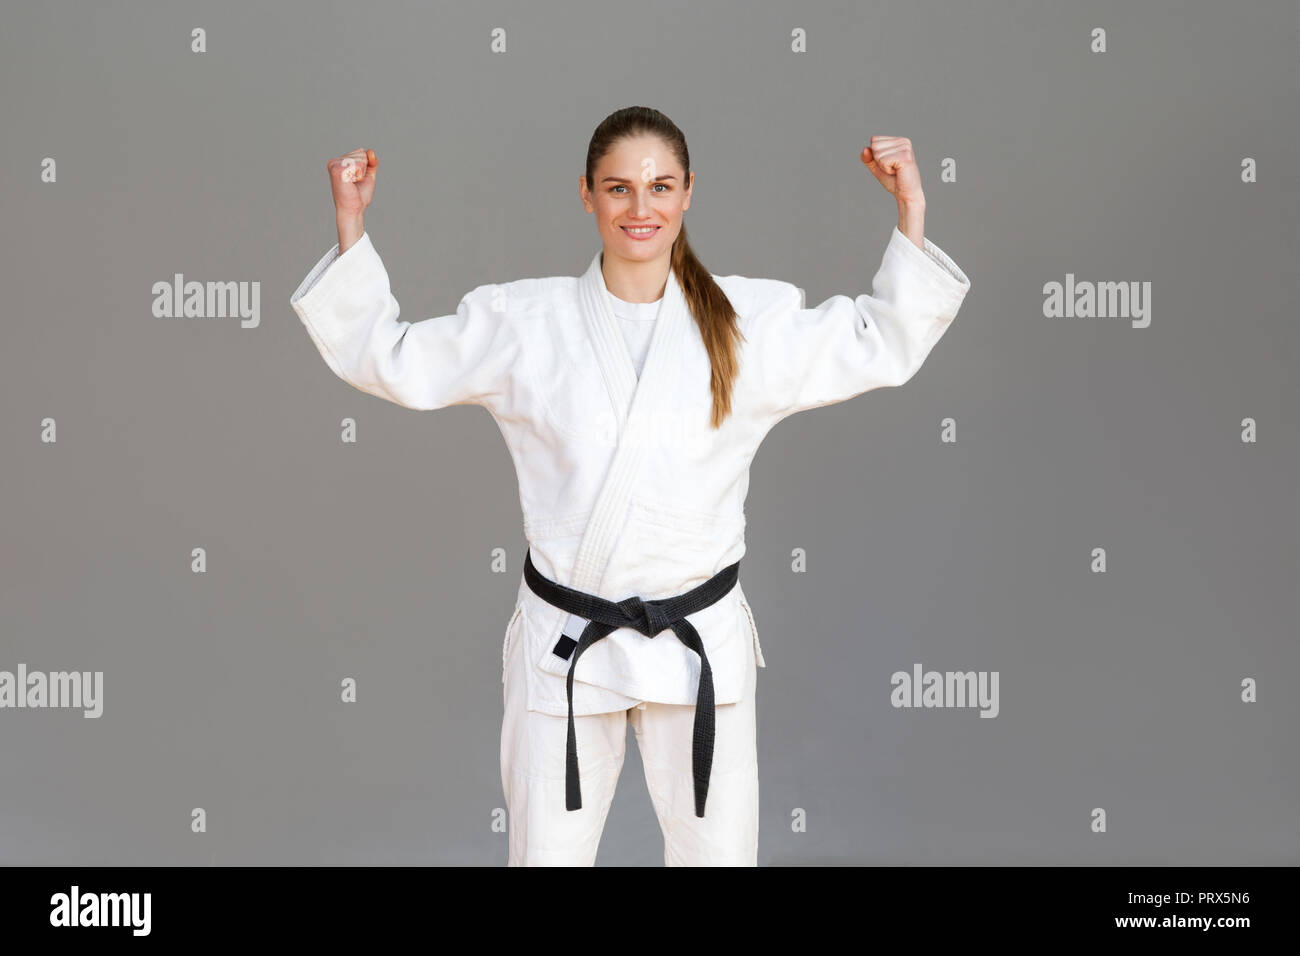 Happy confident athletic young woman in white kimono and black belt standing with raised arms showing strong hands looking at camera with toothy smile Stock Photo